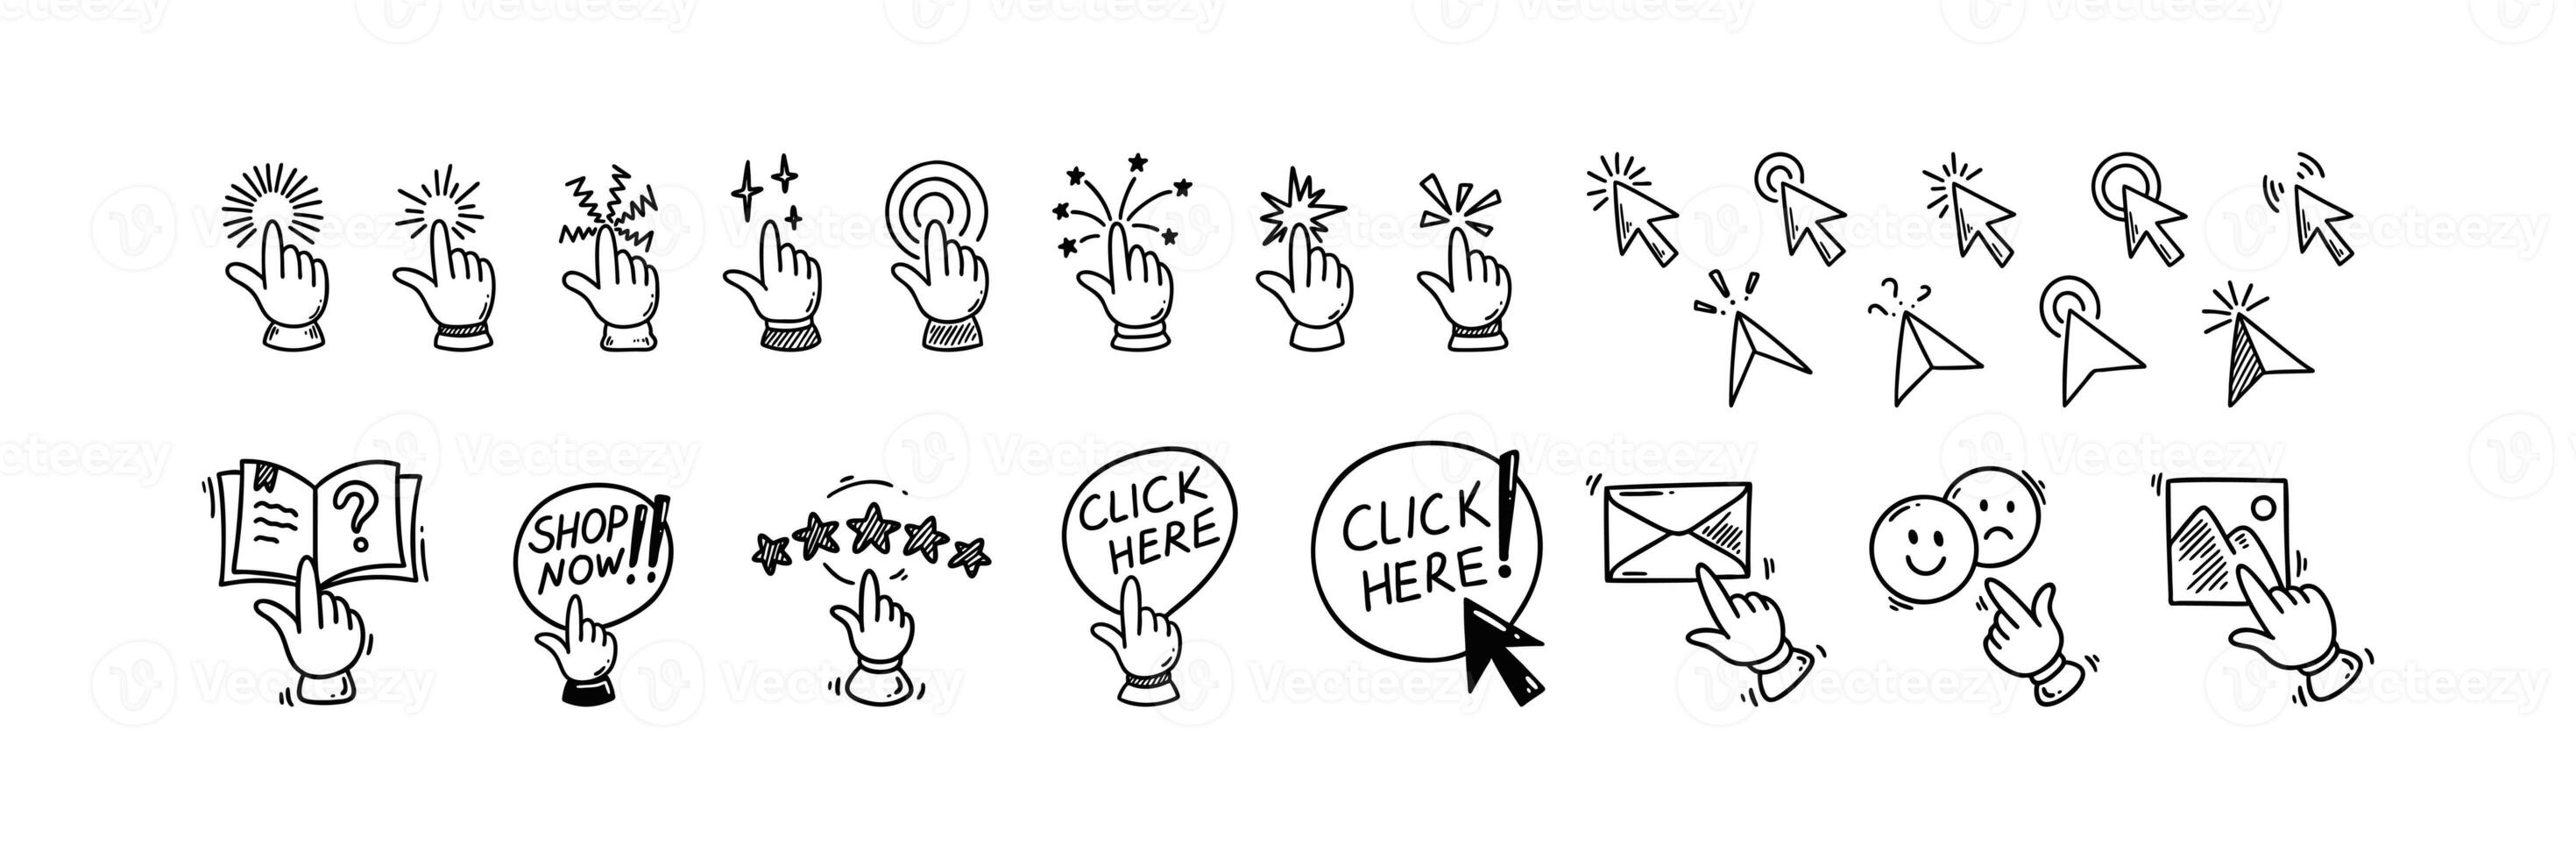 Doodle click icons set. Hand finger cursor pointer. Enable notifications. Customer five star rating and testimonials. Shop now and click here buttons. Subscribe to newsletter. Follow social media. photo